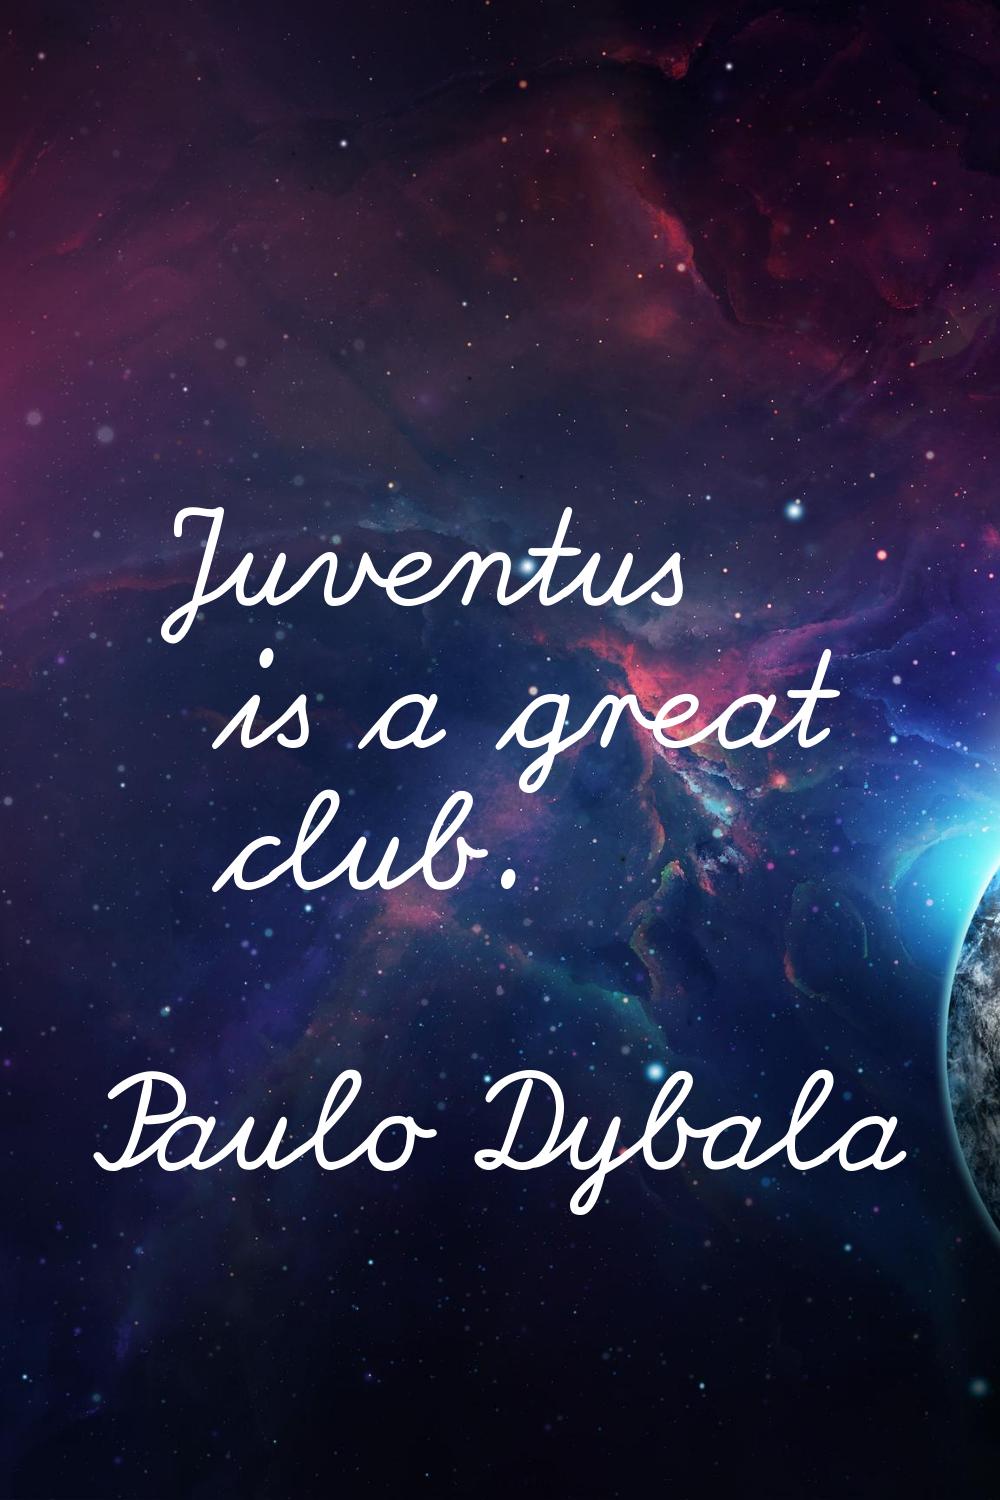 Juventus is a great club.